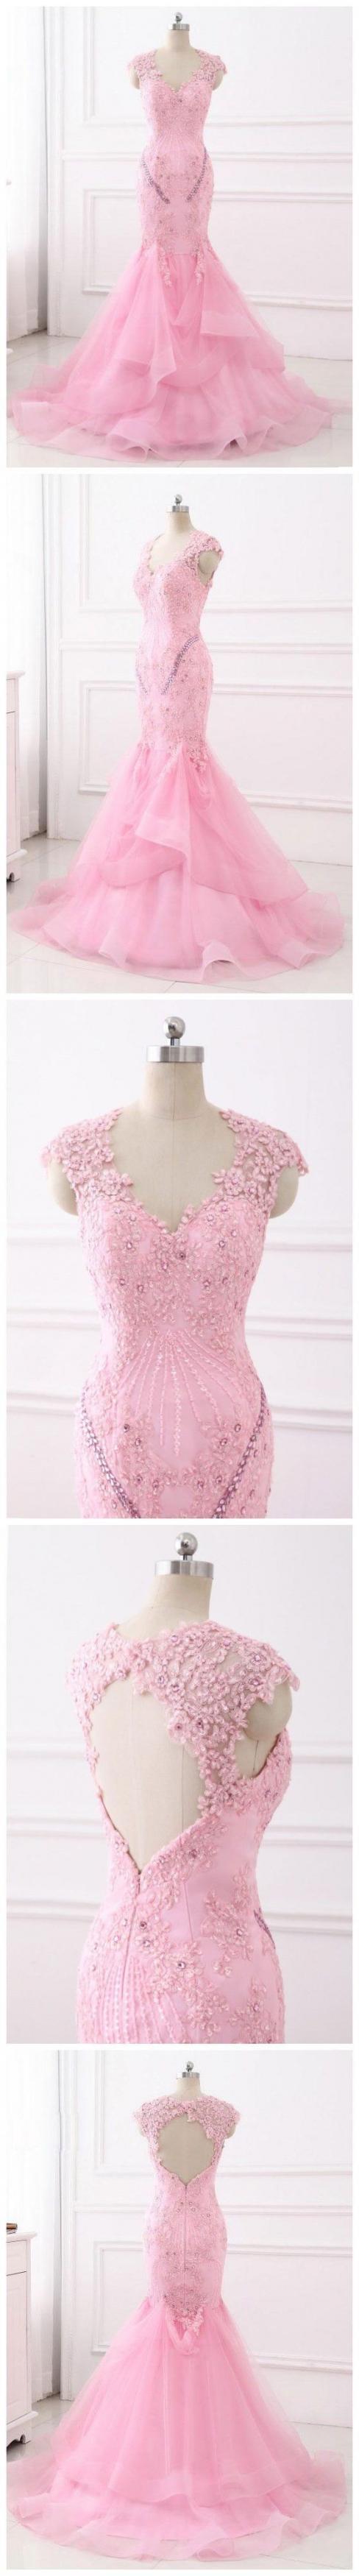 Chic Trumpet/mermaid Pink Prom Dresses With Lace Beading Prom Dress Evening Dresses